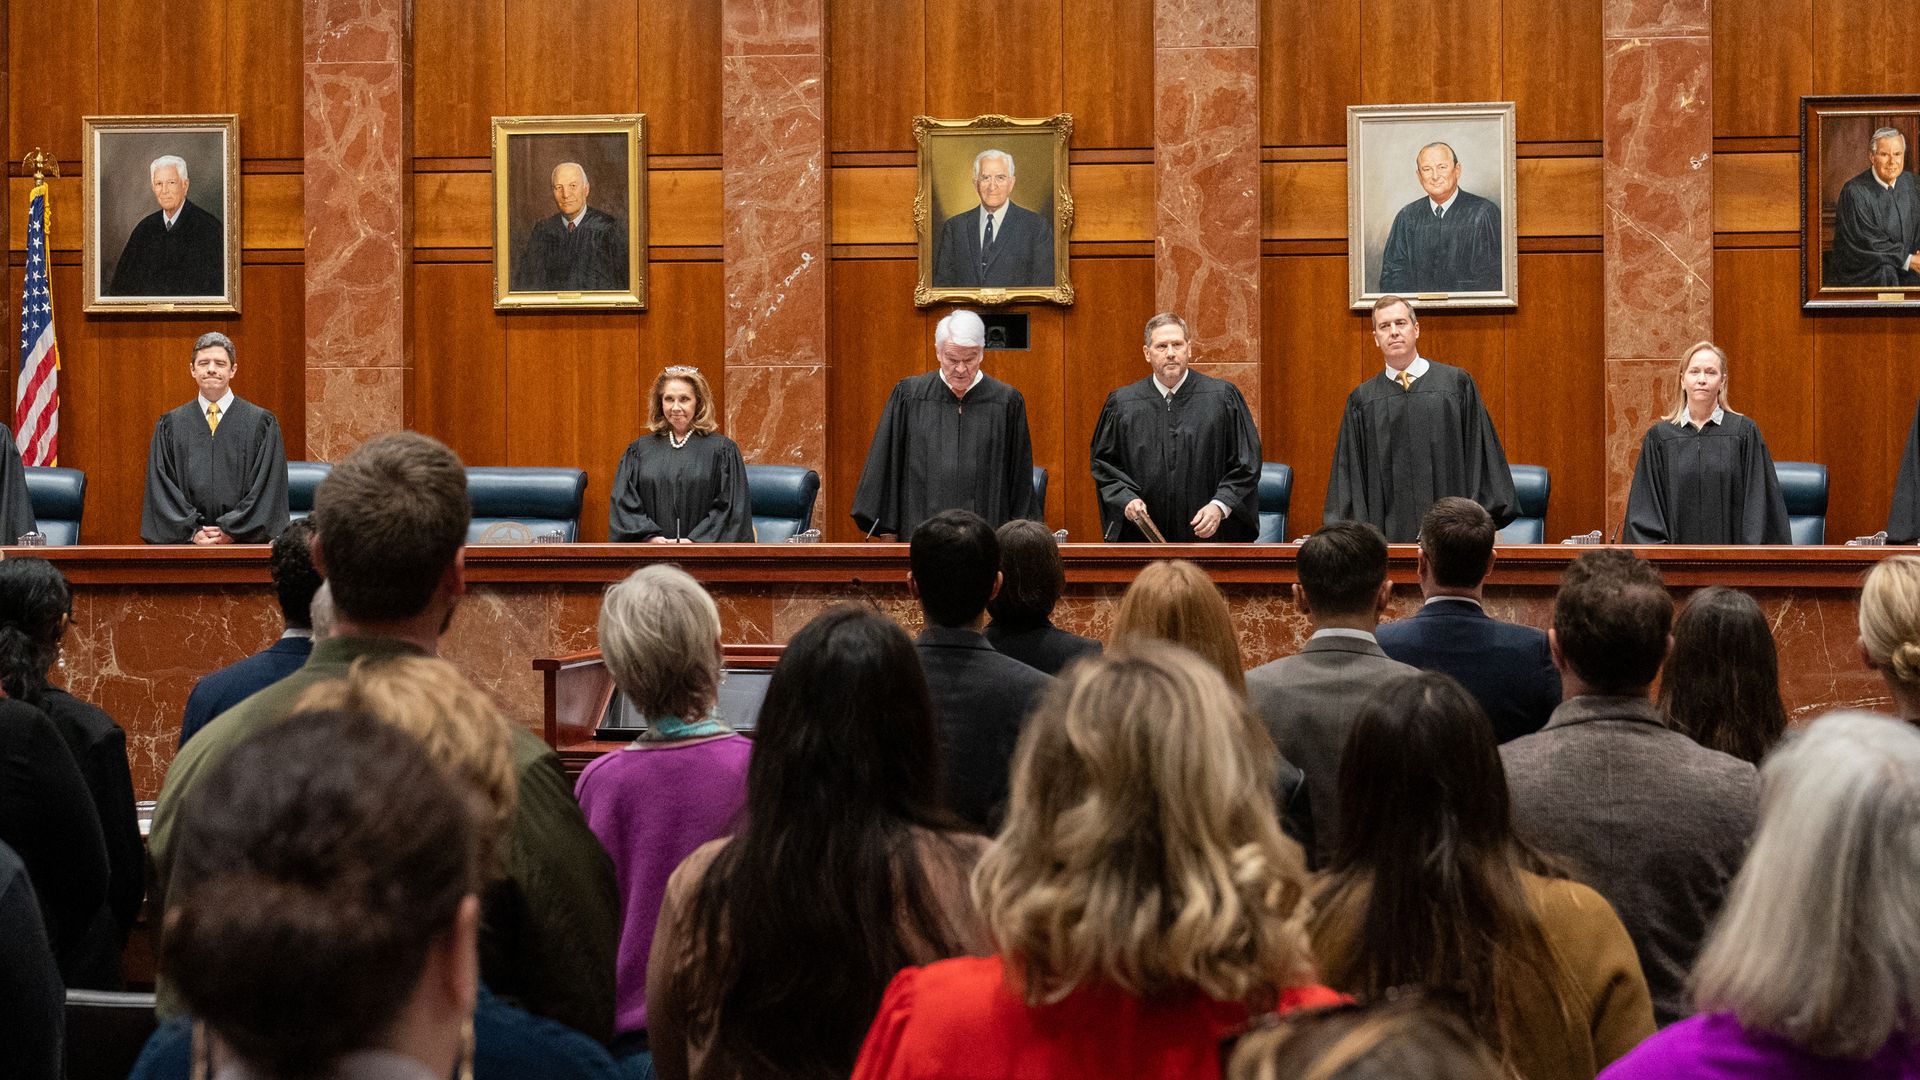 Texas's Supreme Court is now temporarily blocking a woman from having an abortion despite a lower court granting her an emergency order.